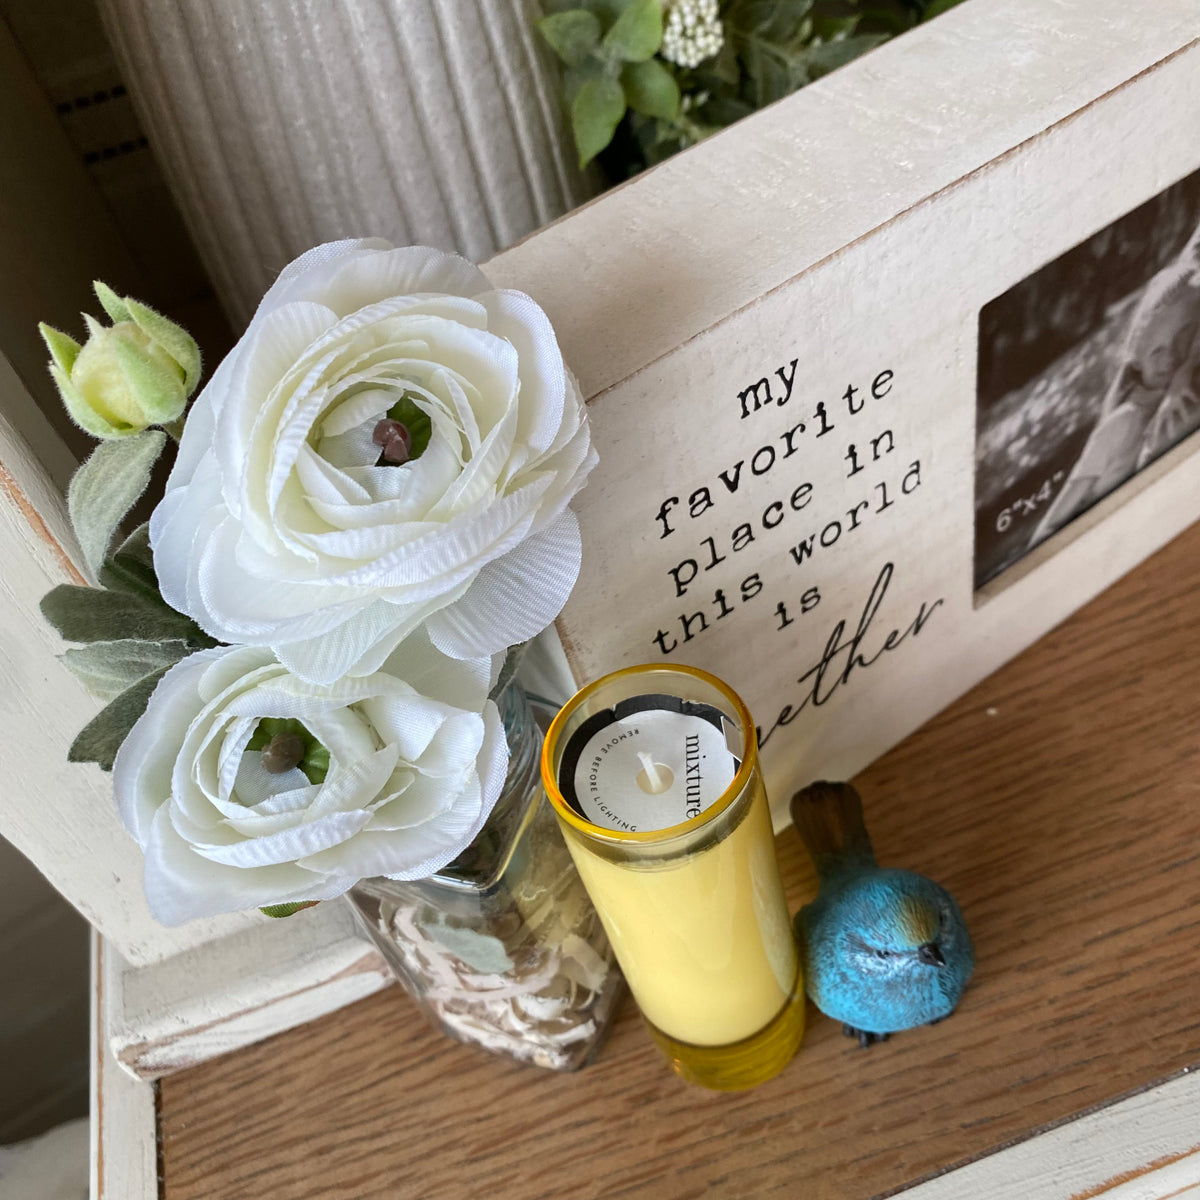 My Favorite Place is Together Frame {Gift Box}